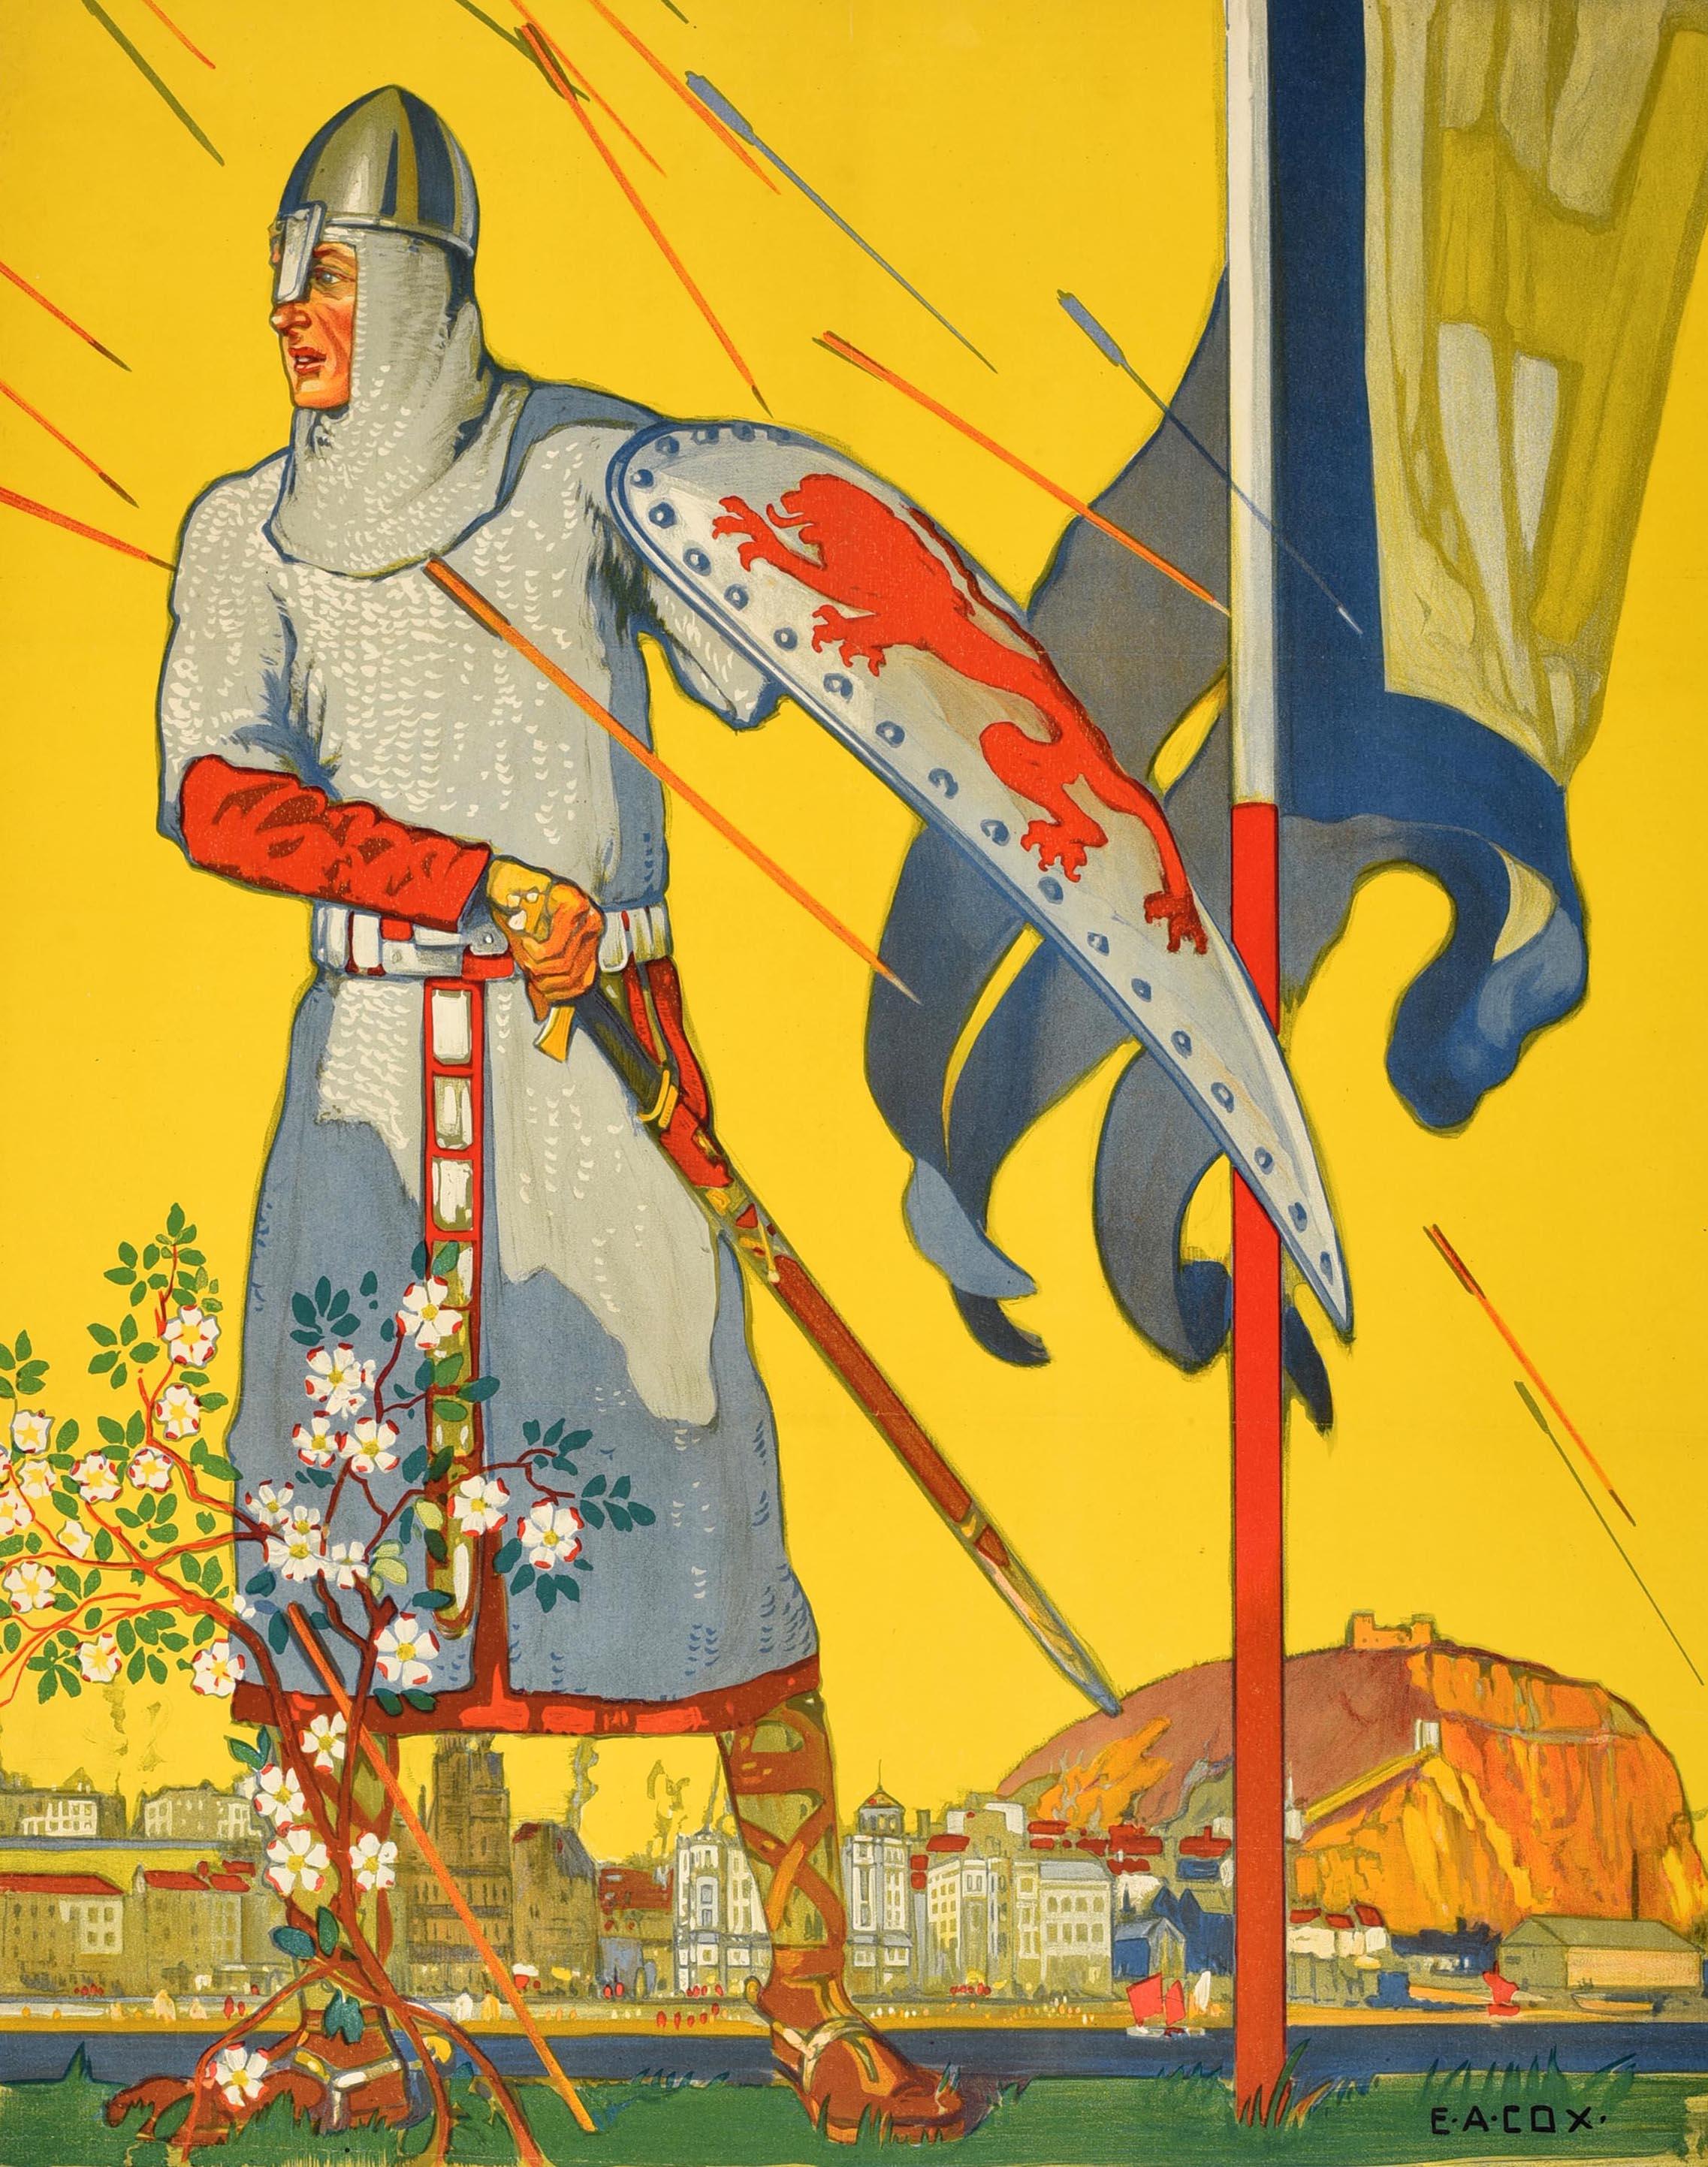 Original vintage travel poster for the historical South Coast towns of Hastings & St Leonards in Sussex featuring stunning artwork by the British painter Elijah Albert Cox (1876-1955) depicting arrows shooting at an English soldier in full armour